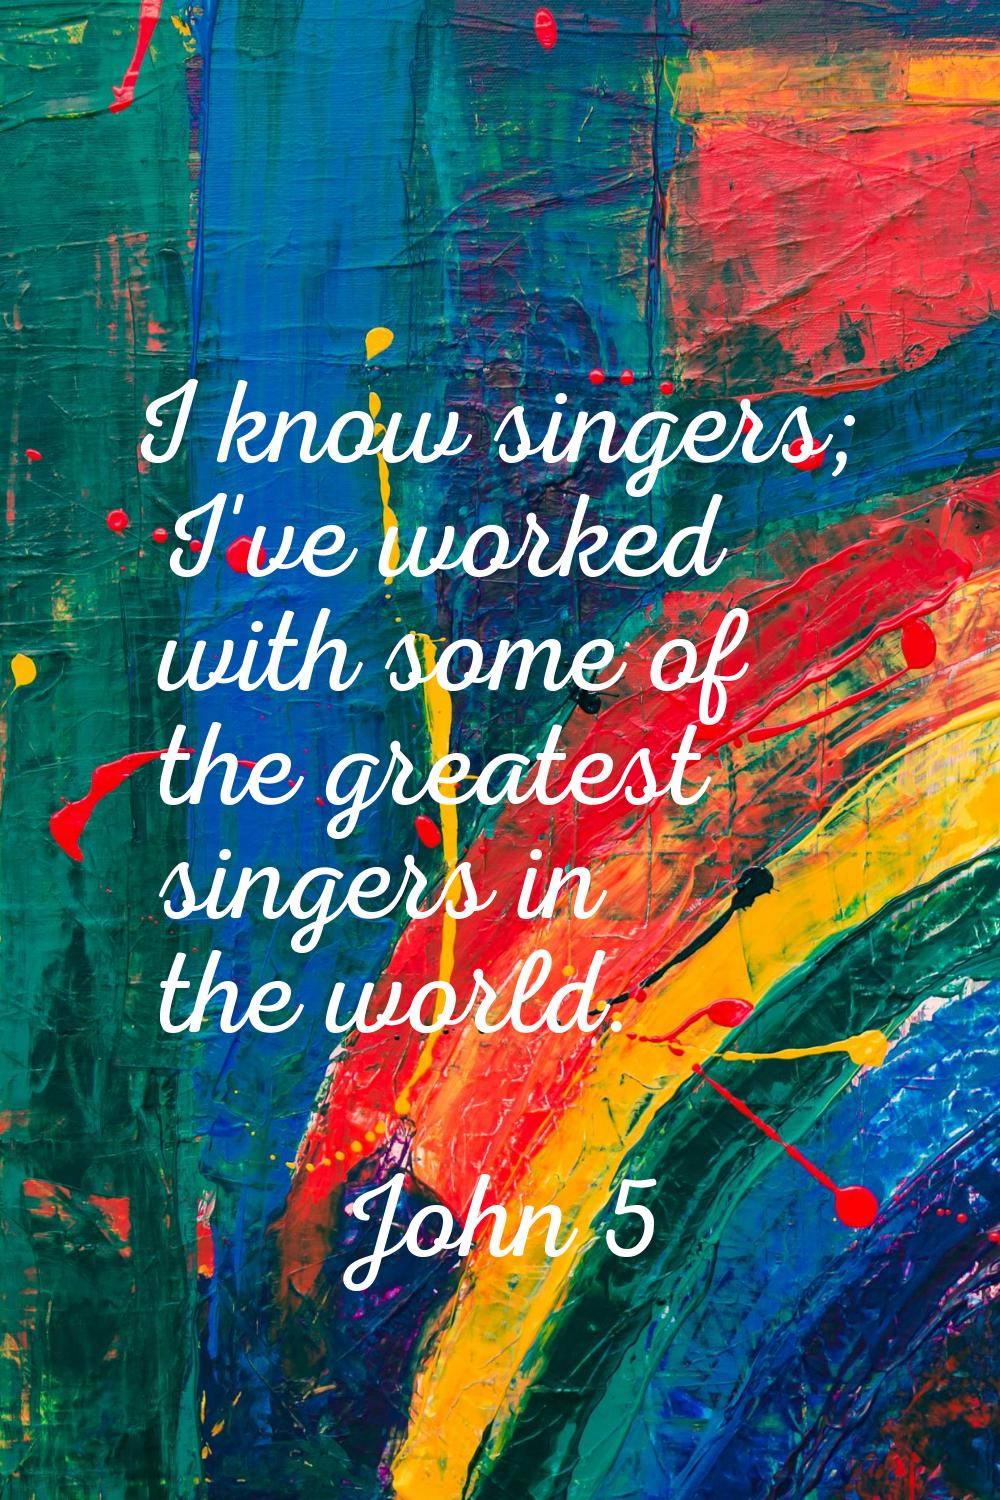 I know singers; I've worked with some of the greatest singers in the world.